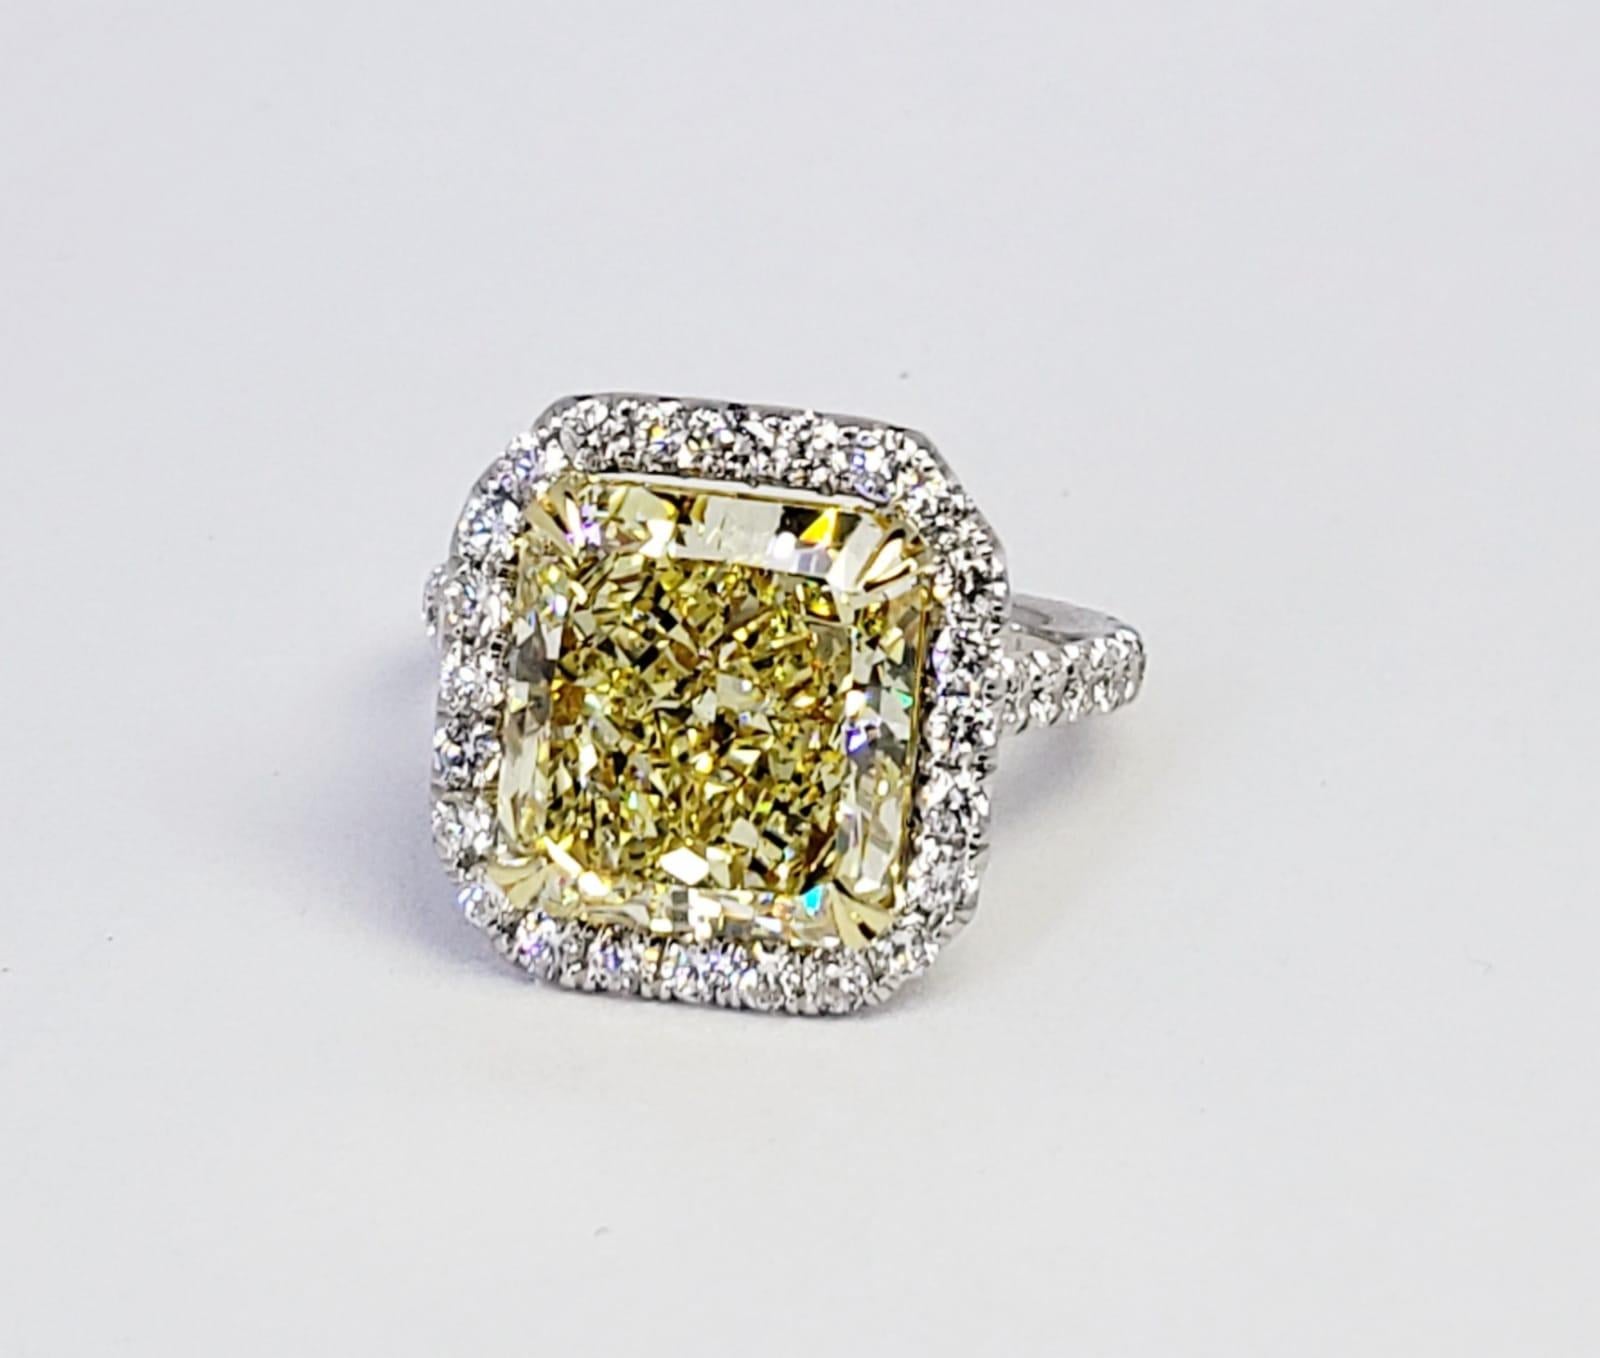 Rosenberg Diamonds & Co. 5.94 carat Radiant cut Fancy Yellow VS2 clarity is accompanied by a GIA certificate. This striking Radiant is full of brilliance and it is set in a handmade platinum and 18 karat yellow gold setting. This ring completes its